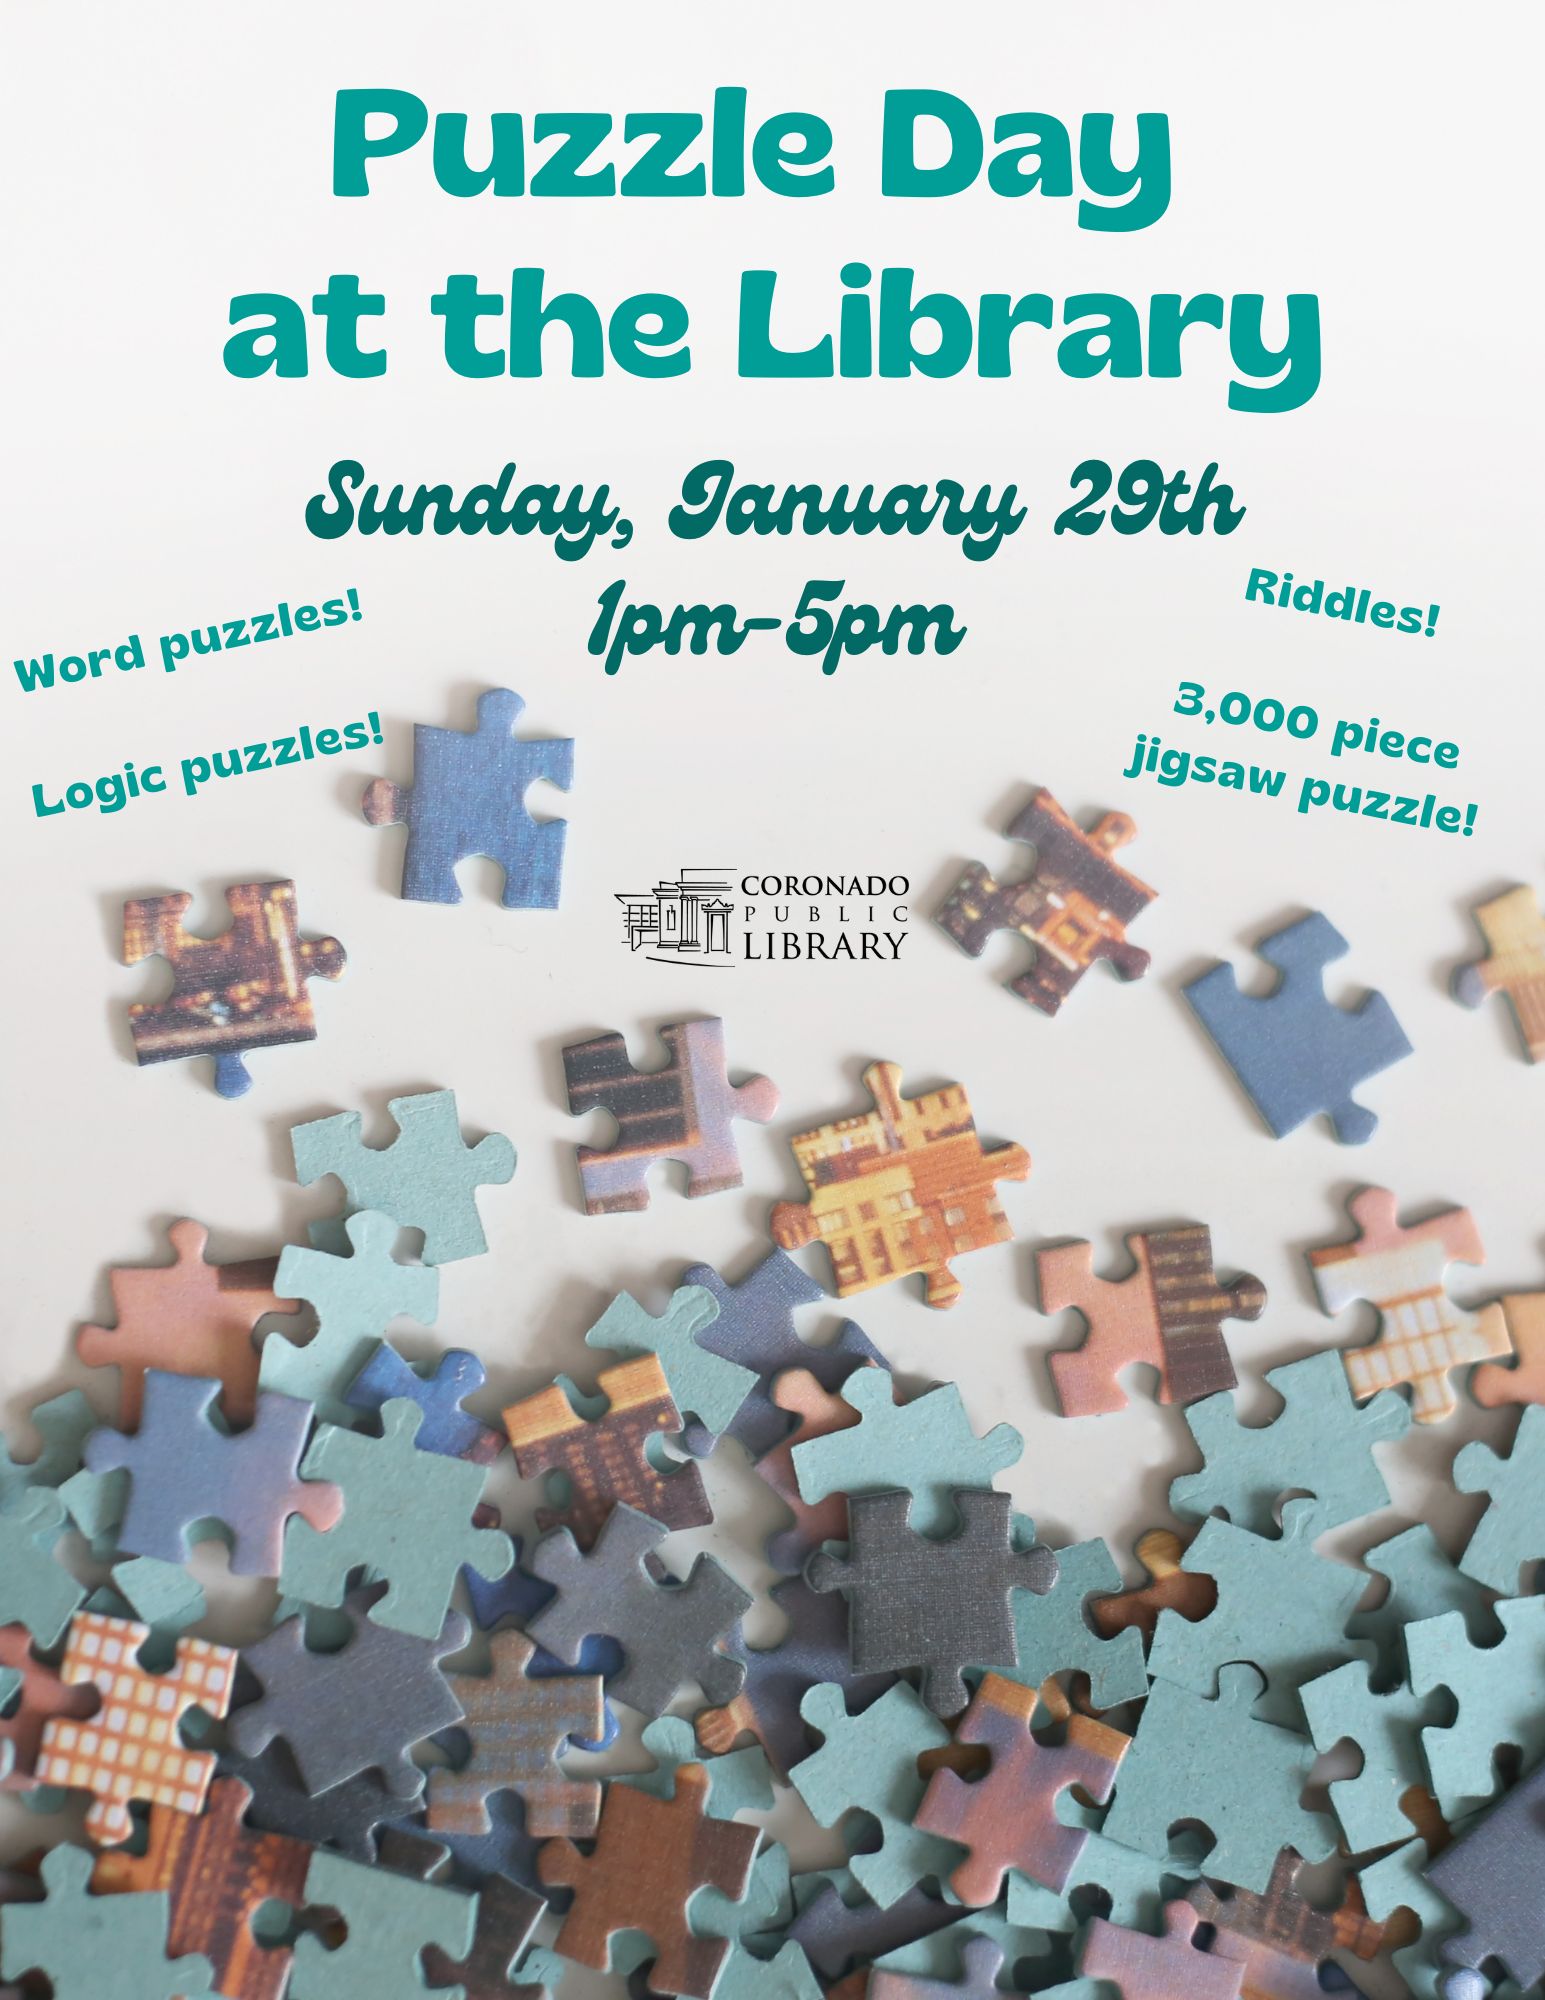 Puzzle Day at the Library with puzzle pieces